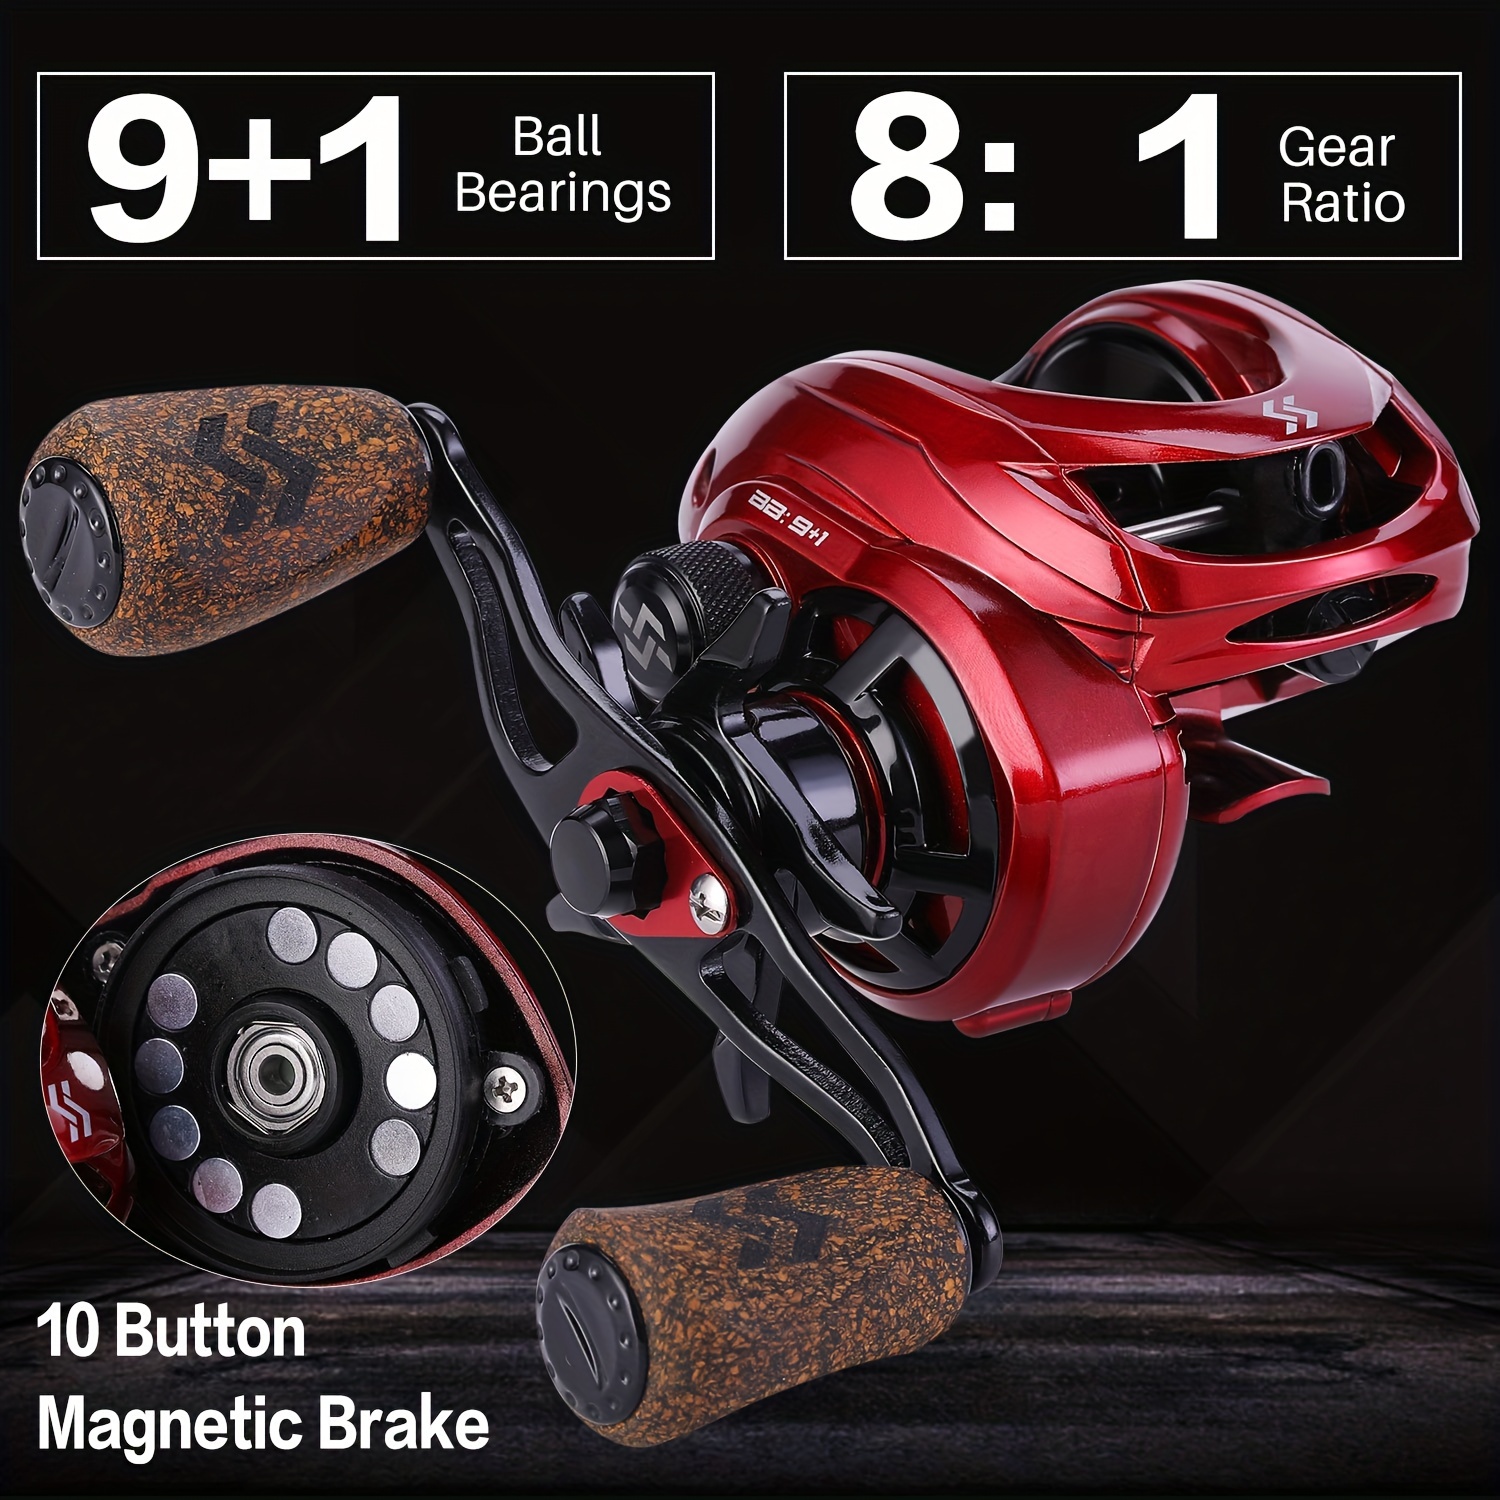 

Sougayilang Baitcasting Reels, 8:1 Gear Ratio Fishing Reel With Magnetic Braking System Casting Reel, 9 + 1 Ball Bearings Super Smooth Anti-corrosion Left/right Optional Baitcaster Reel